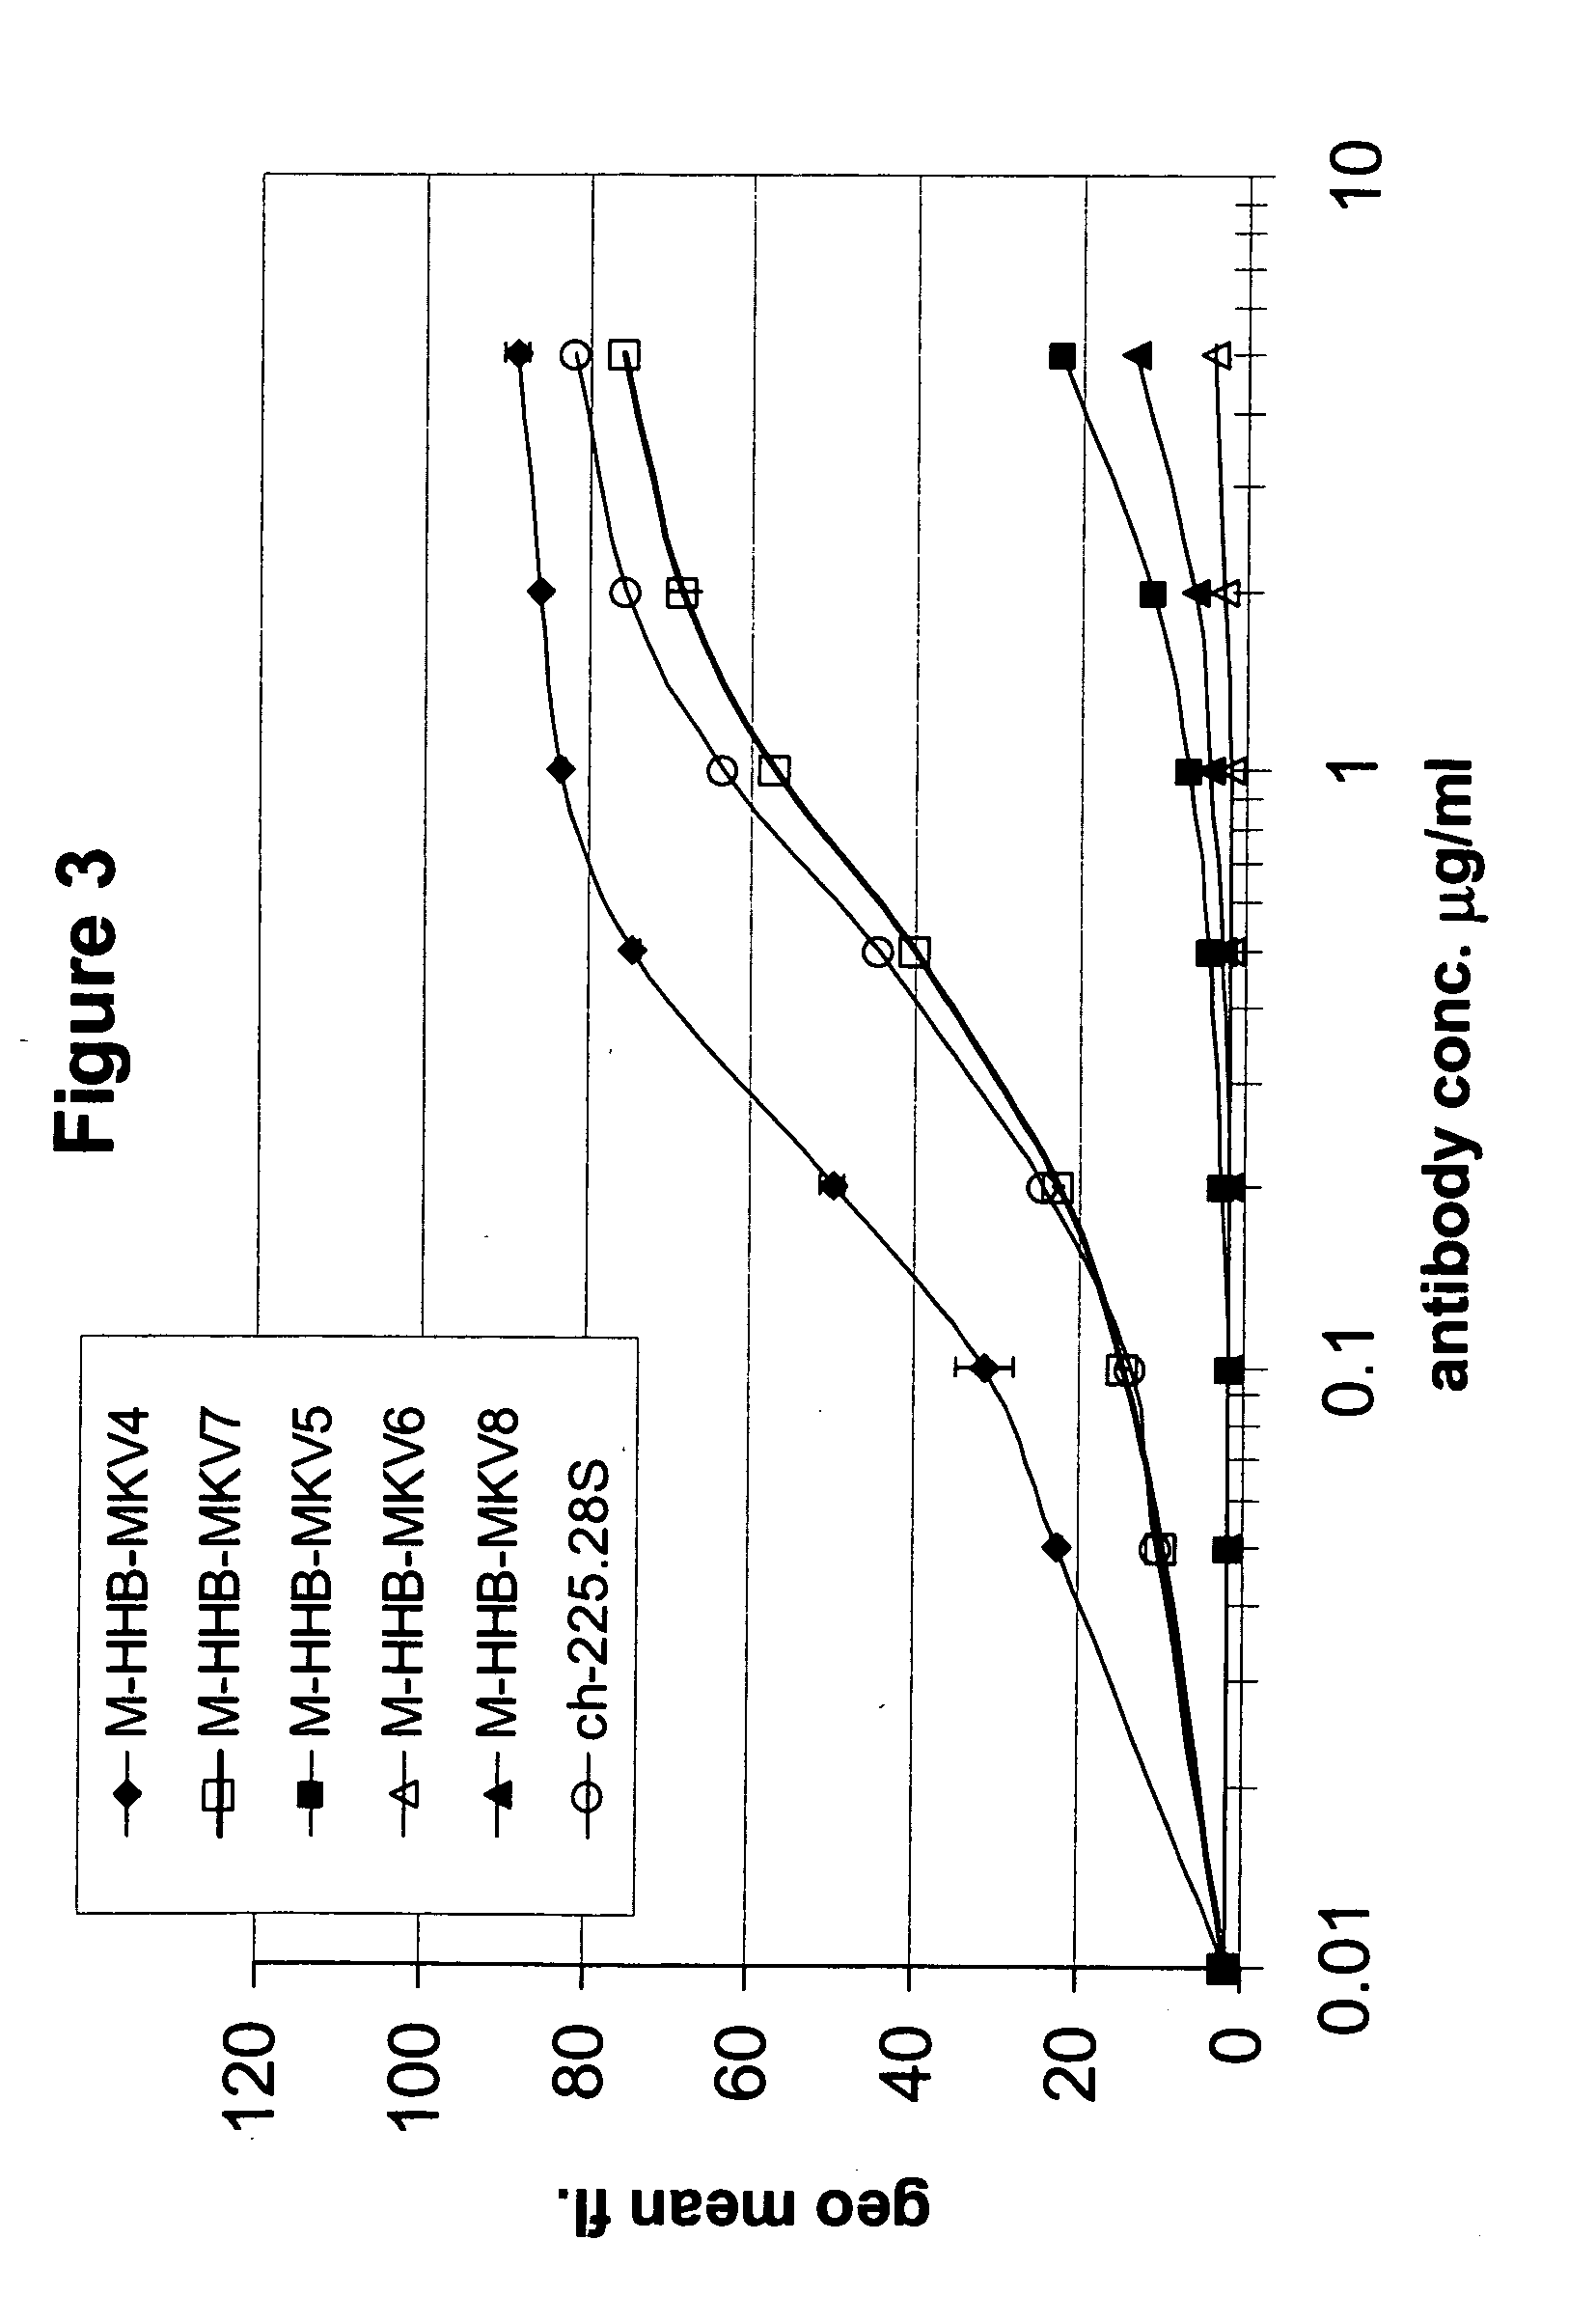 Antigen binding molecules directed to MCSP and having increased Fc receptor binding affinity and effector function